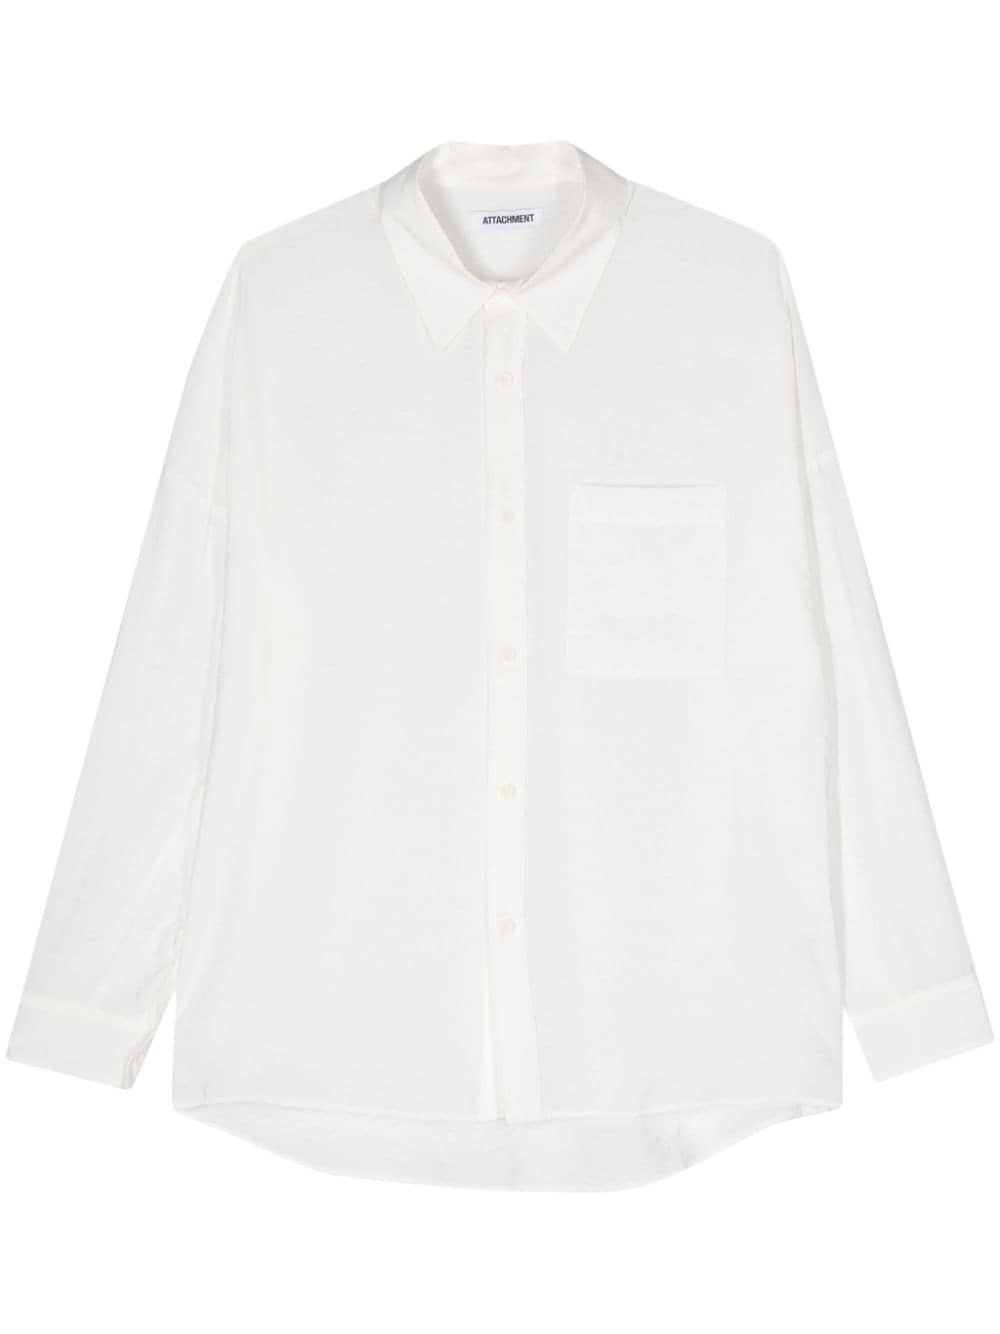 Attachment crinkled long-sleeve shirt - White